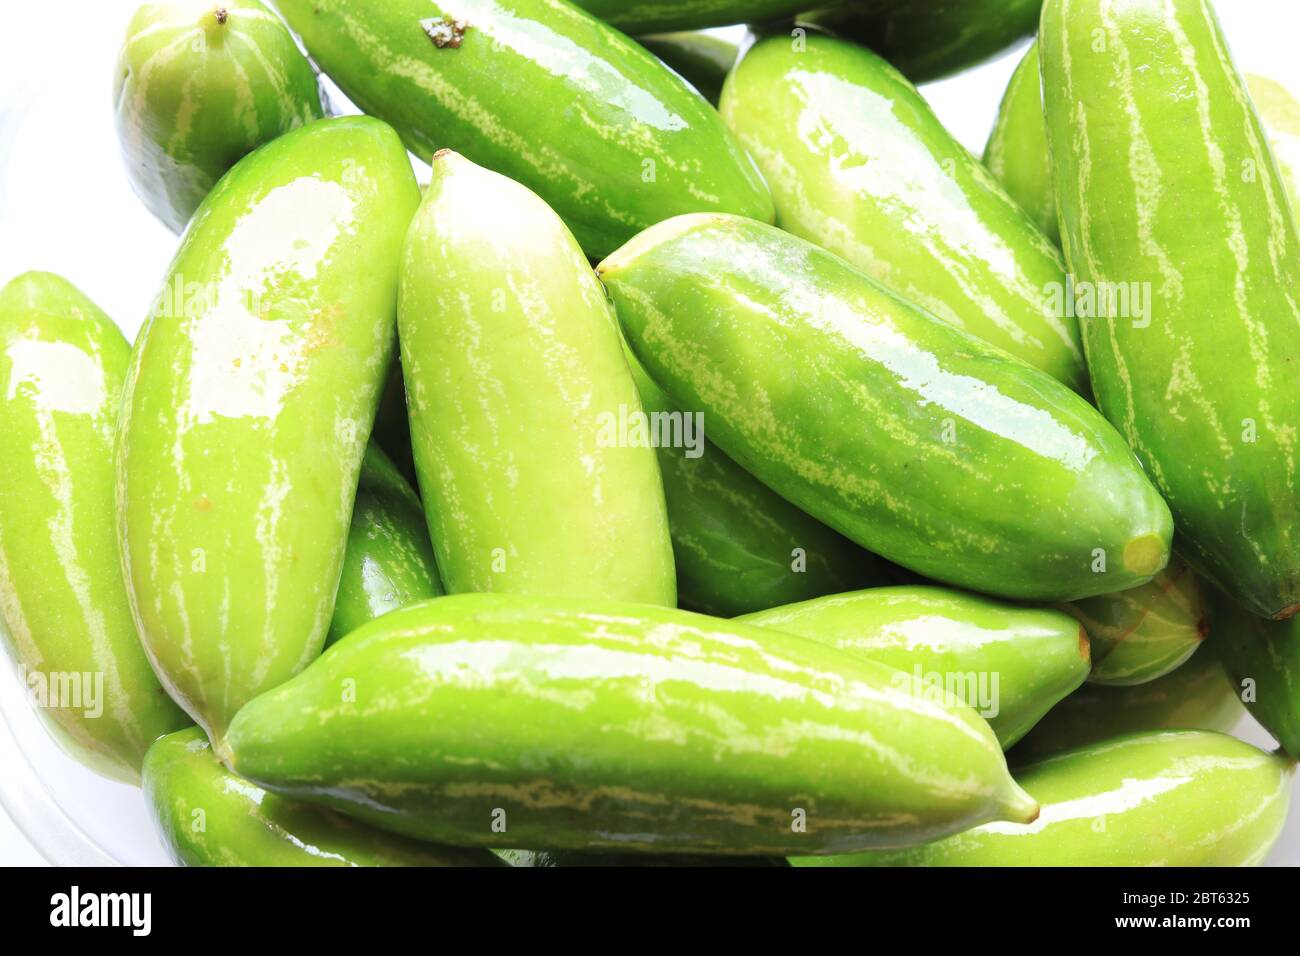 Organic Raw green Coccinia grandis or Ivy gourd on a white background Stock Photo